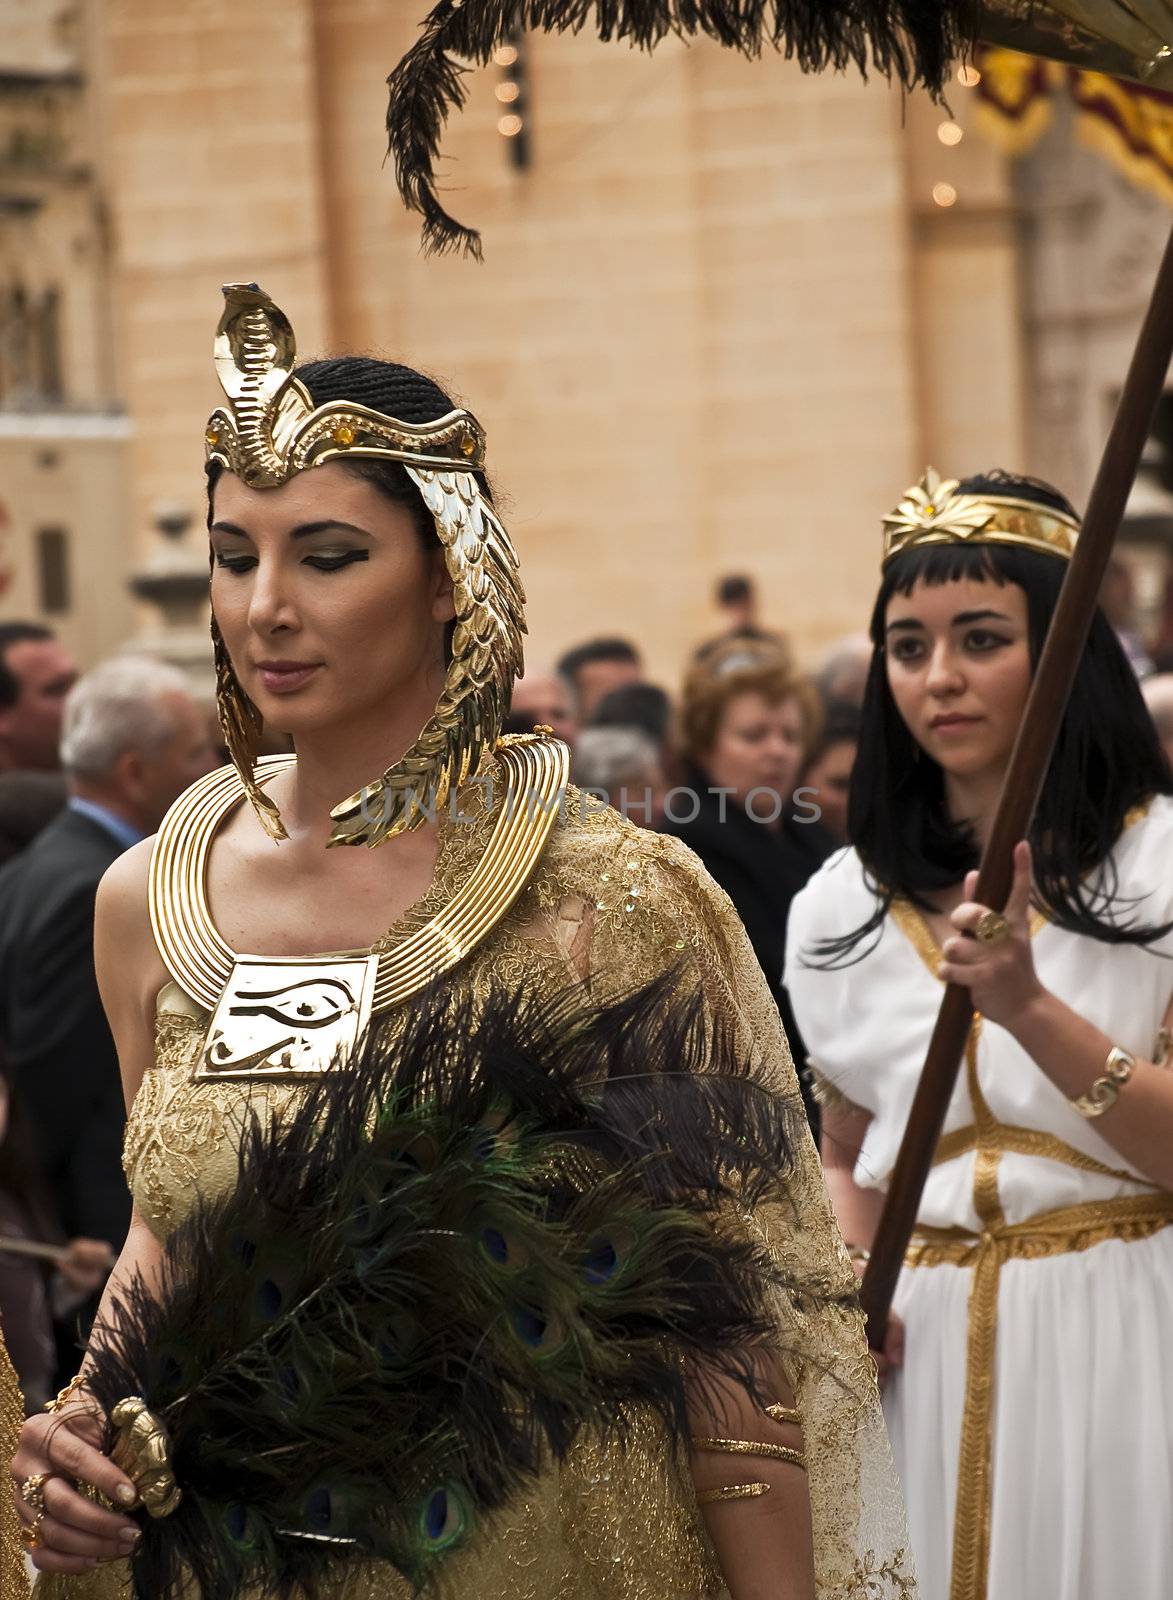 LUQA, MALTA - Friday 10th April 2009 - Egyptian queen during the Good Friday procession in Malta